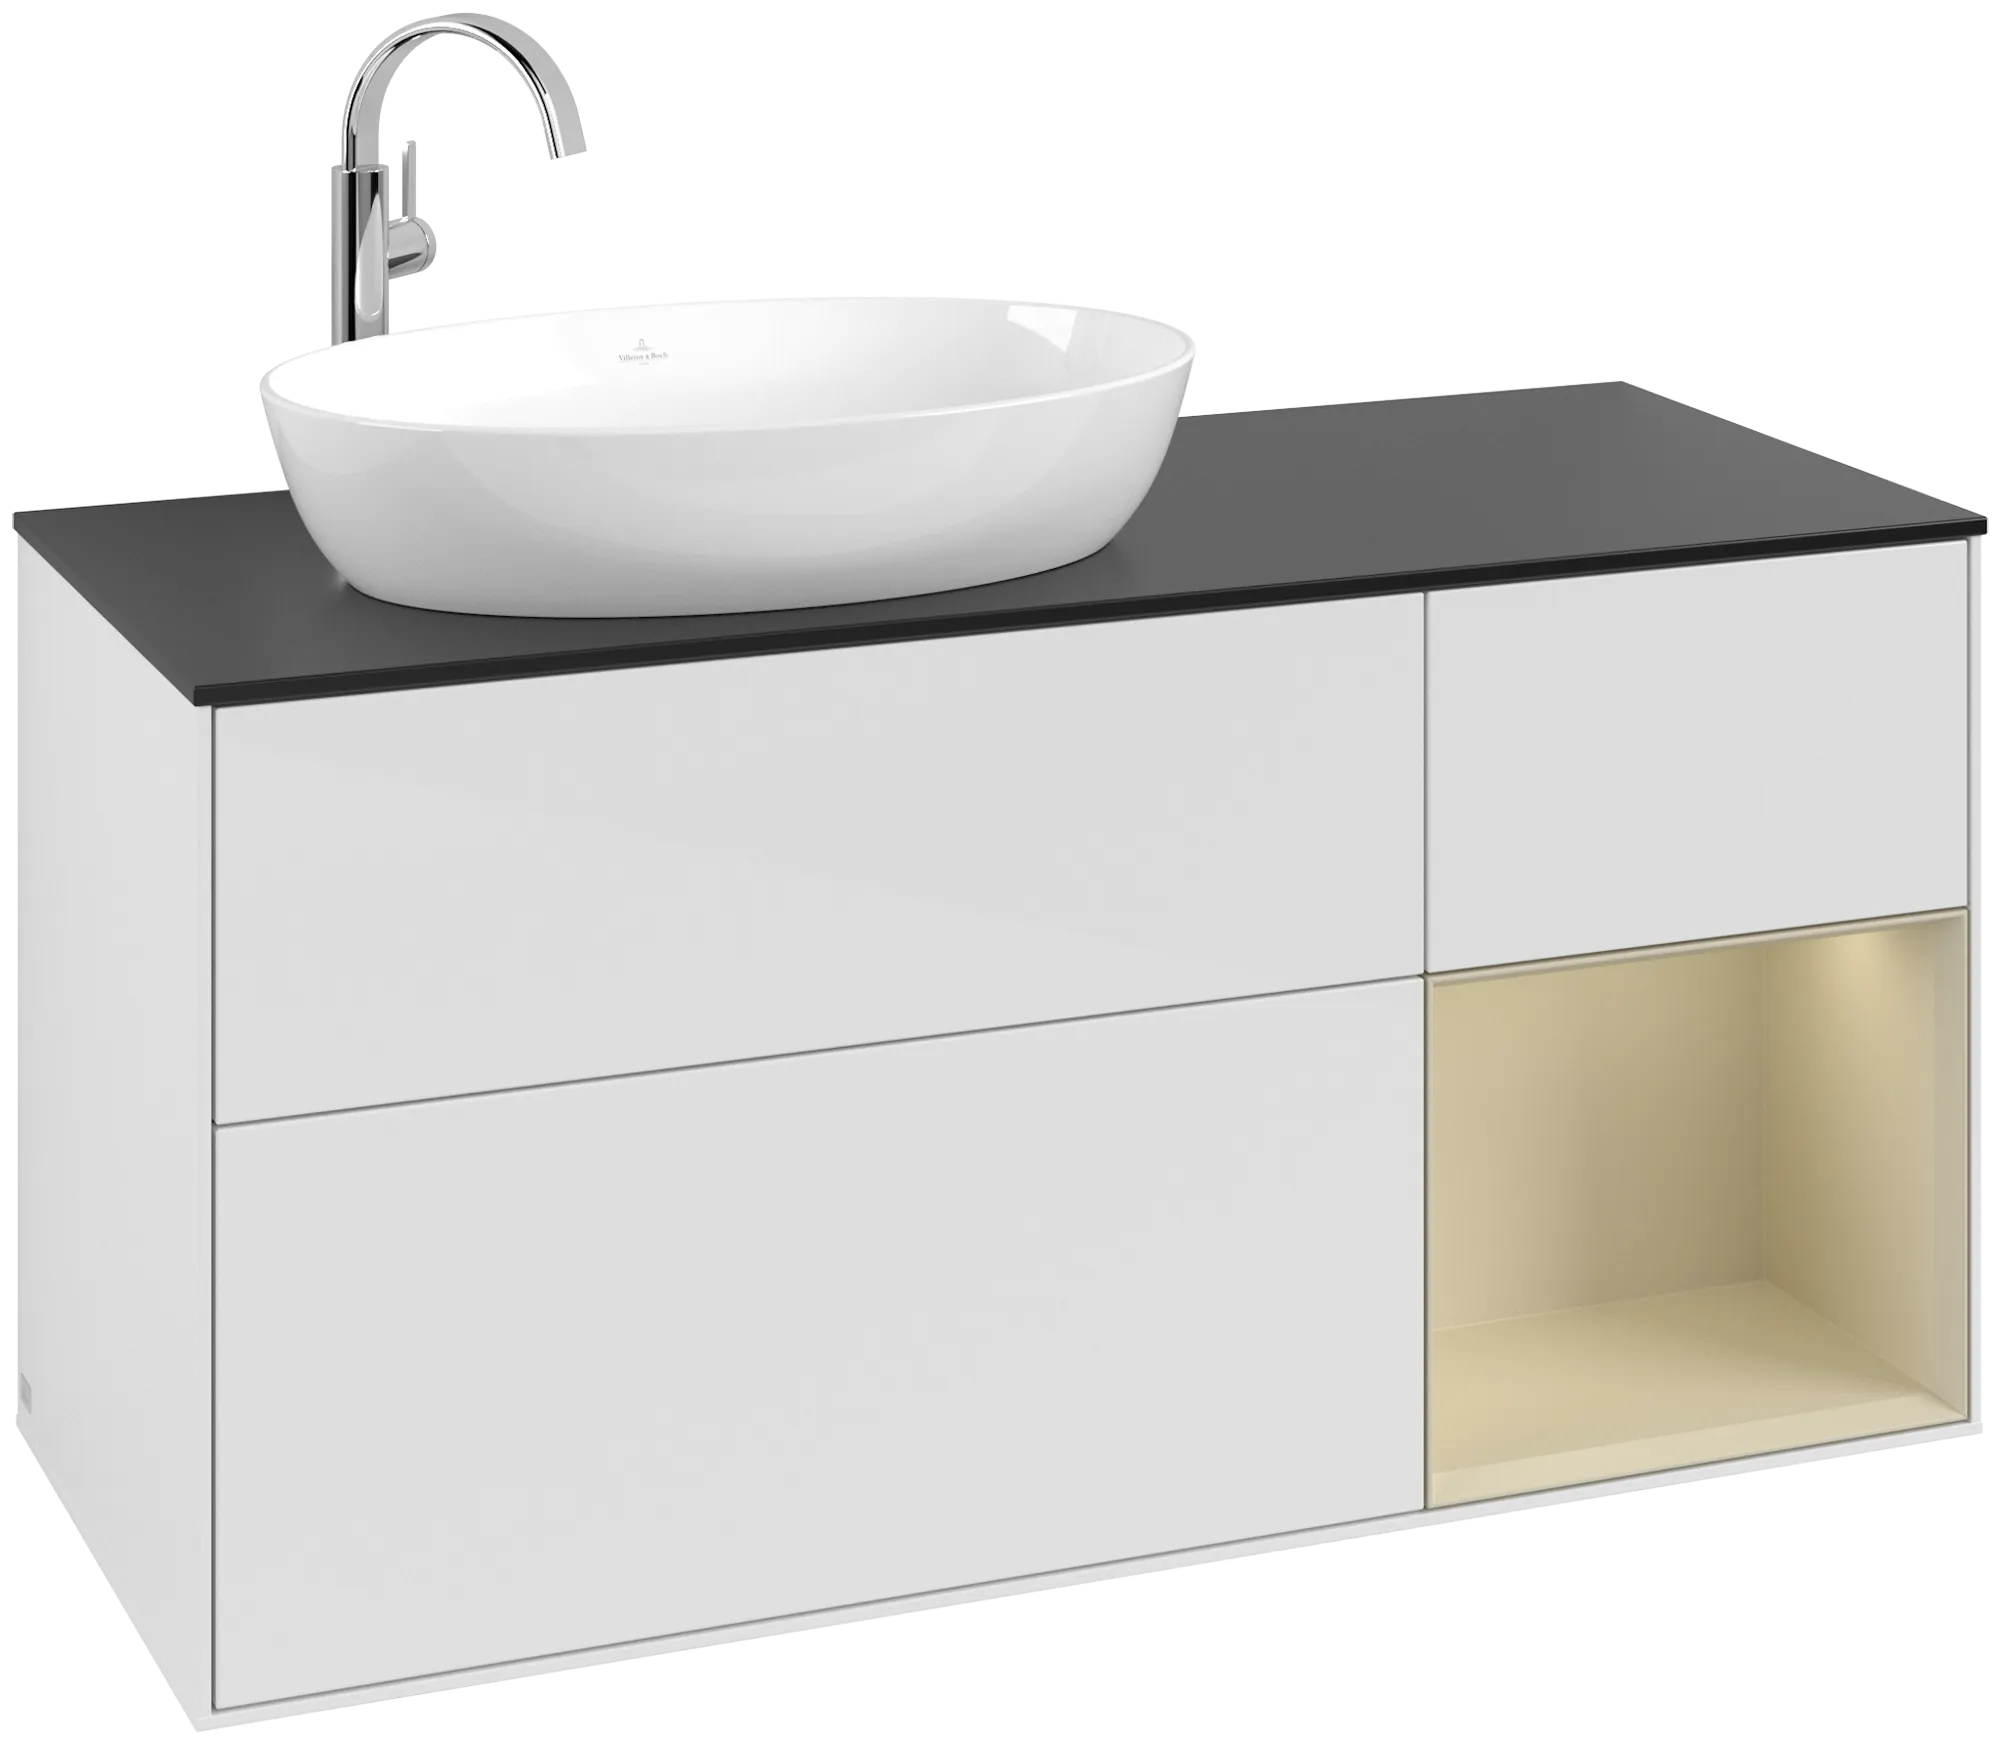 Obrázek VILLEROY BOCH Finion Vanity unit, with lighting, 3 pull-out compartments, 1200 x 603 x 501 mm, Glossy White Lacquer / Silk Grey Matt Lacquer / Glass Black Matt #G932HJGF